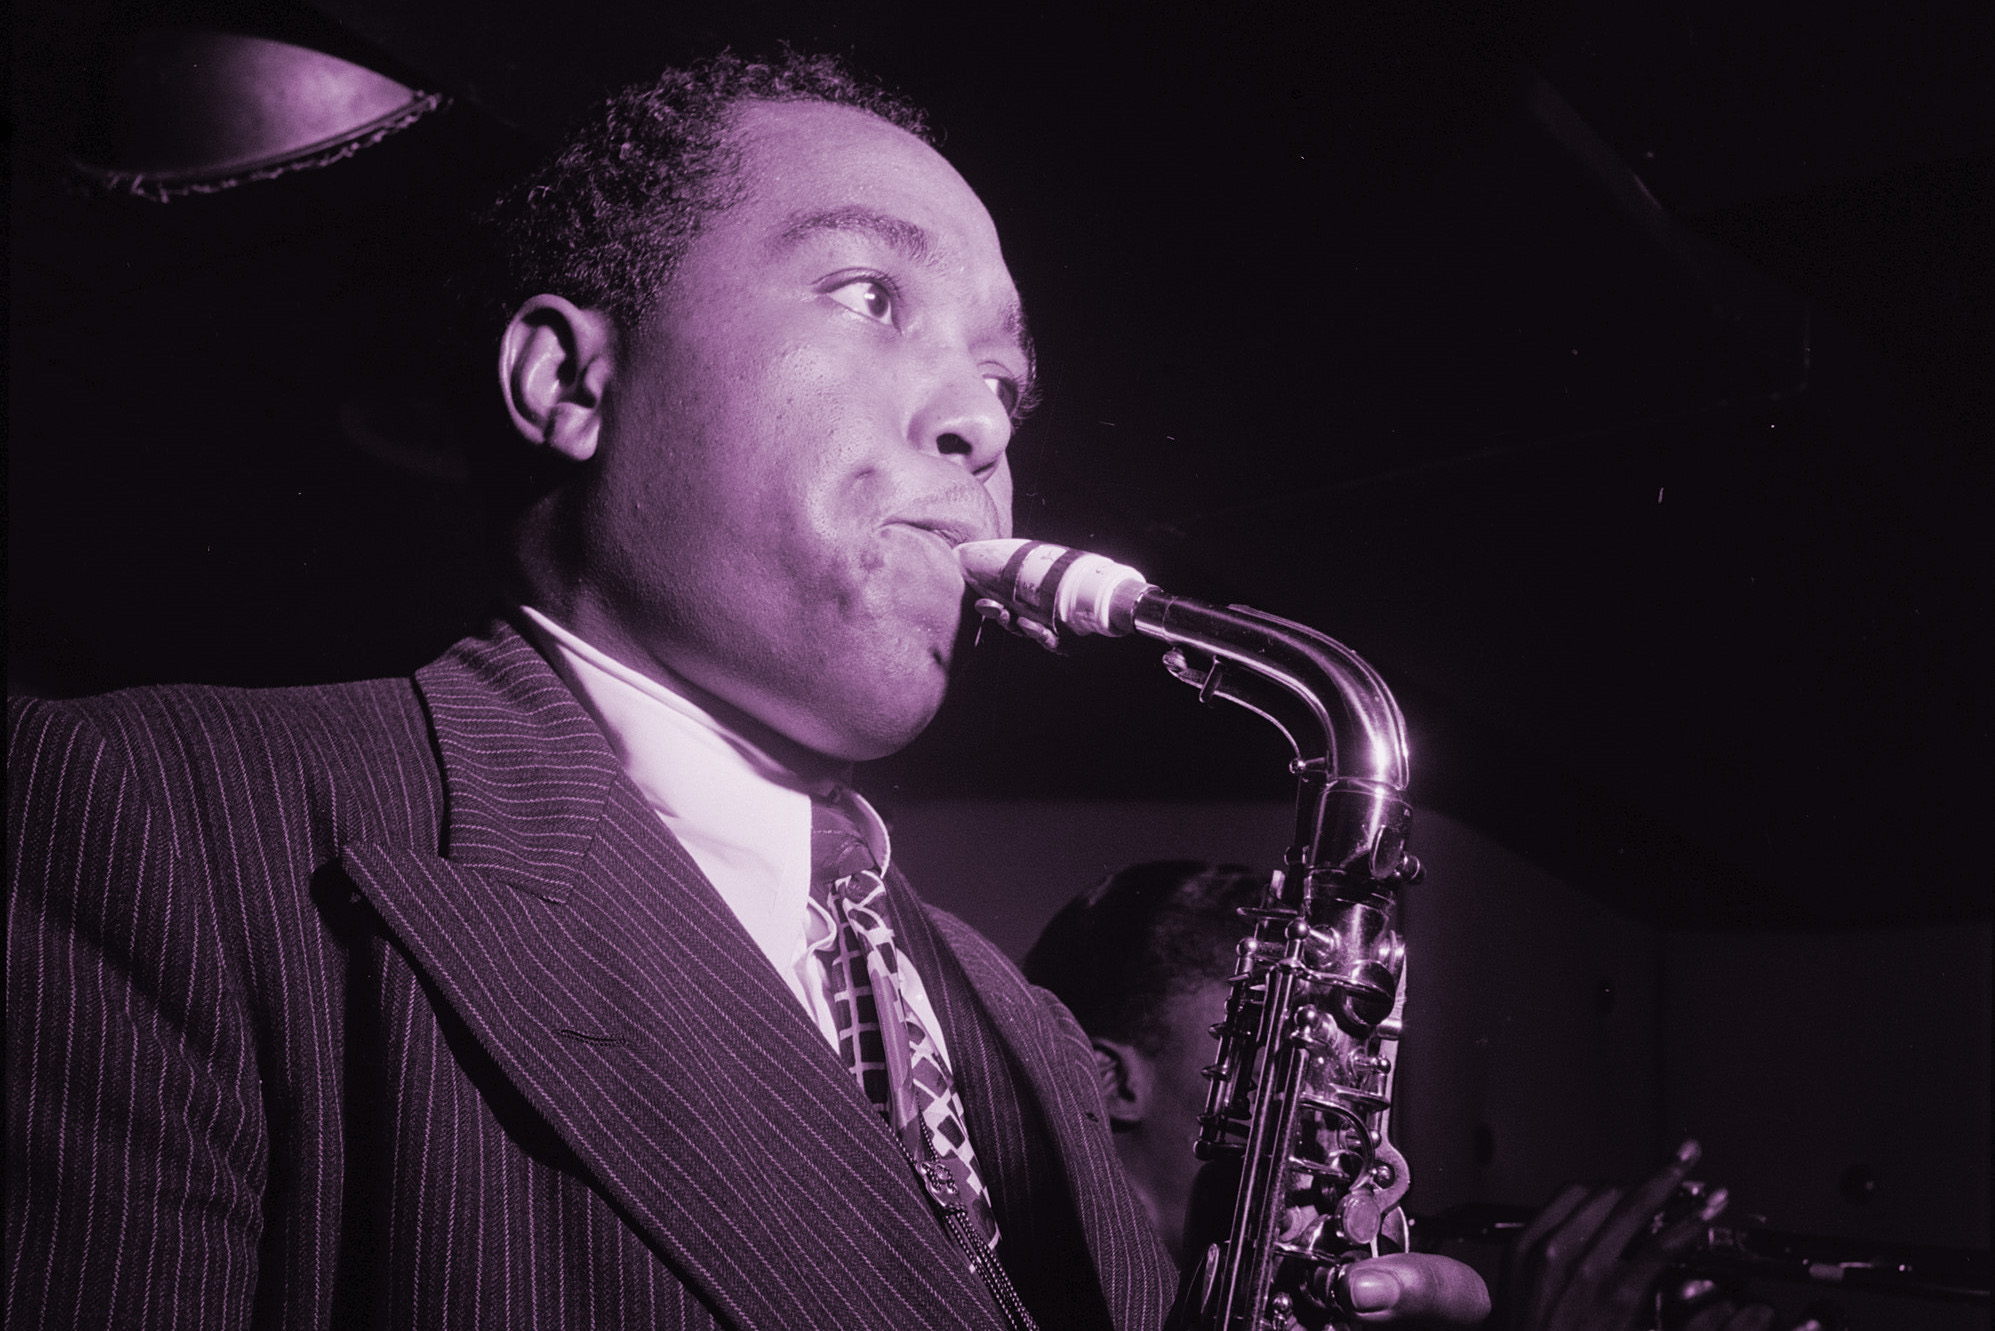 https://indianapublicmedia.org/images/afterglow-images/2187px-portrait_of_charlie_parker_in_1947.jpg